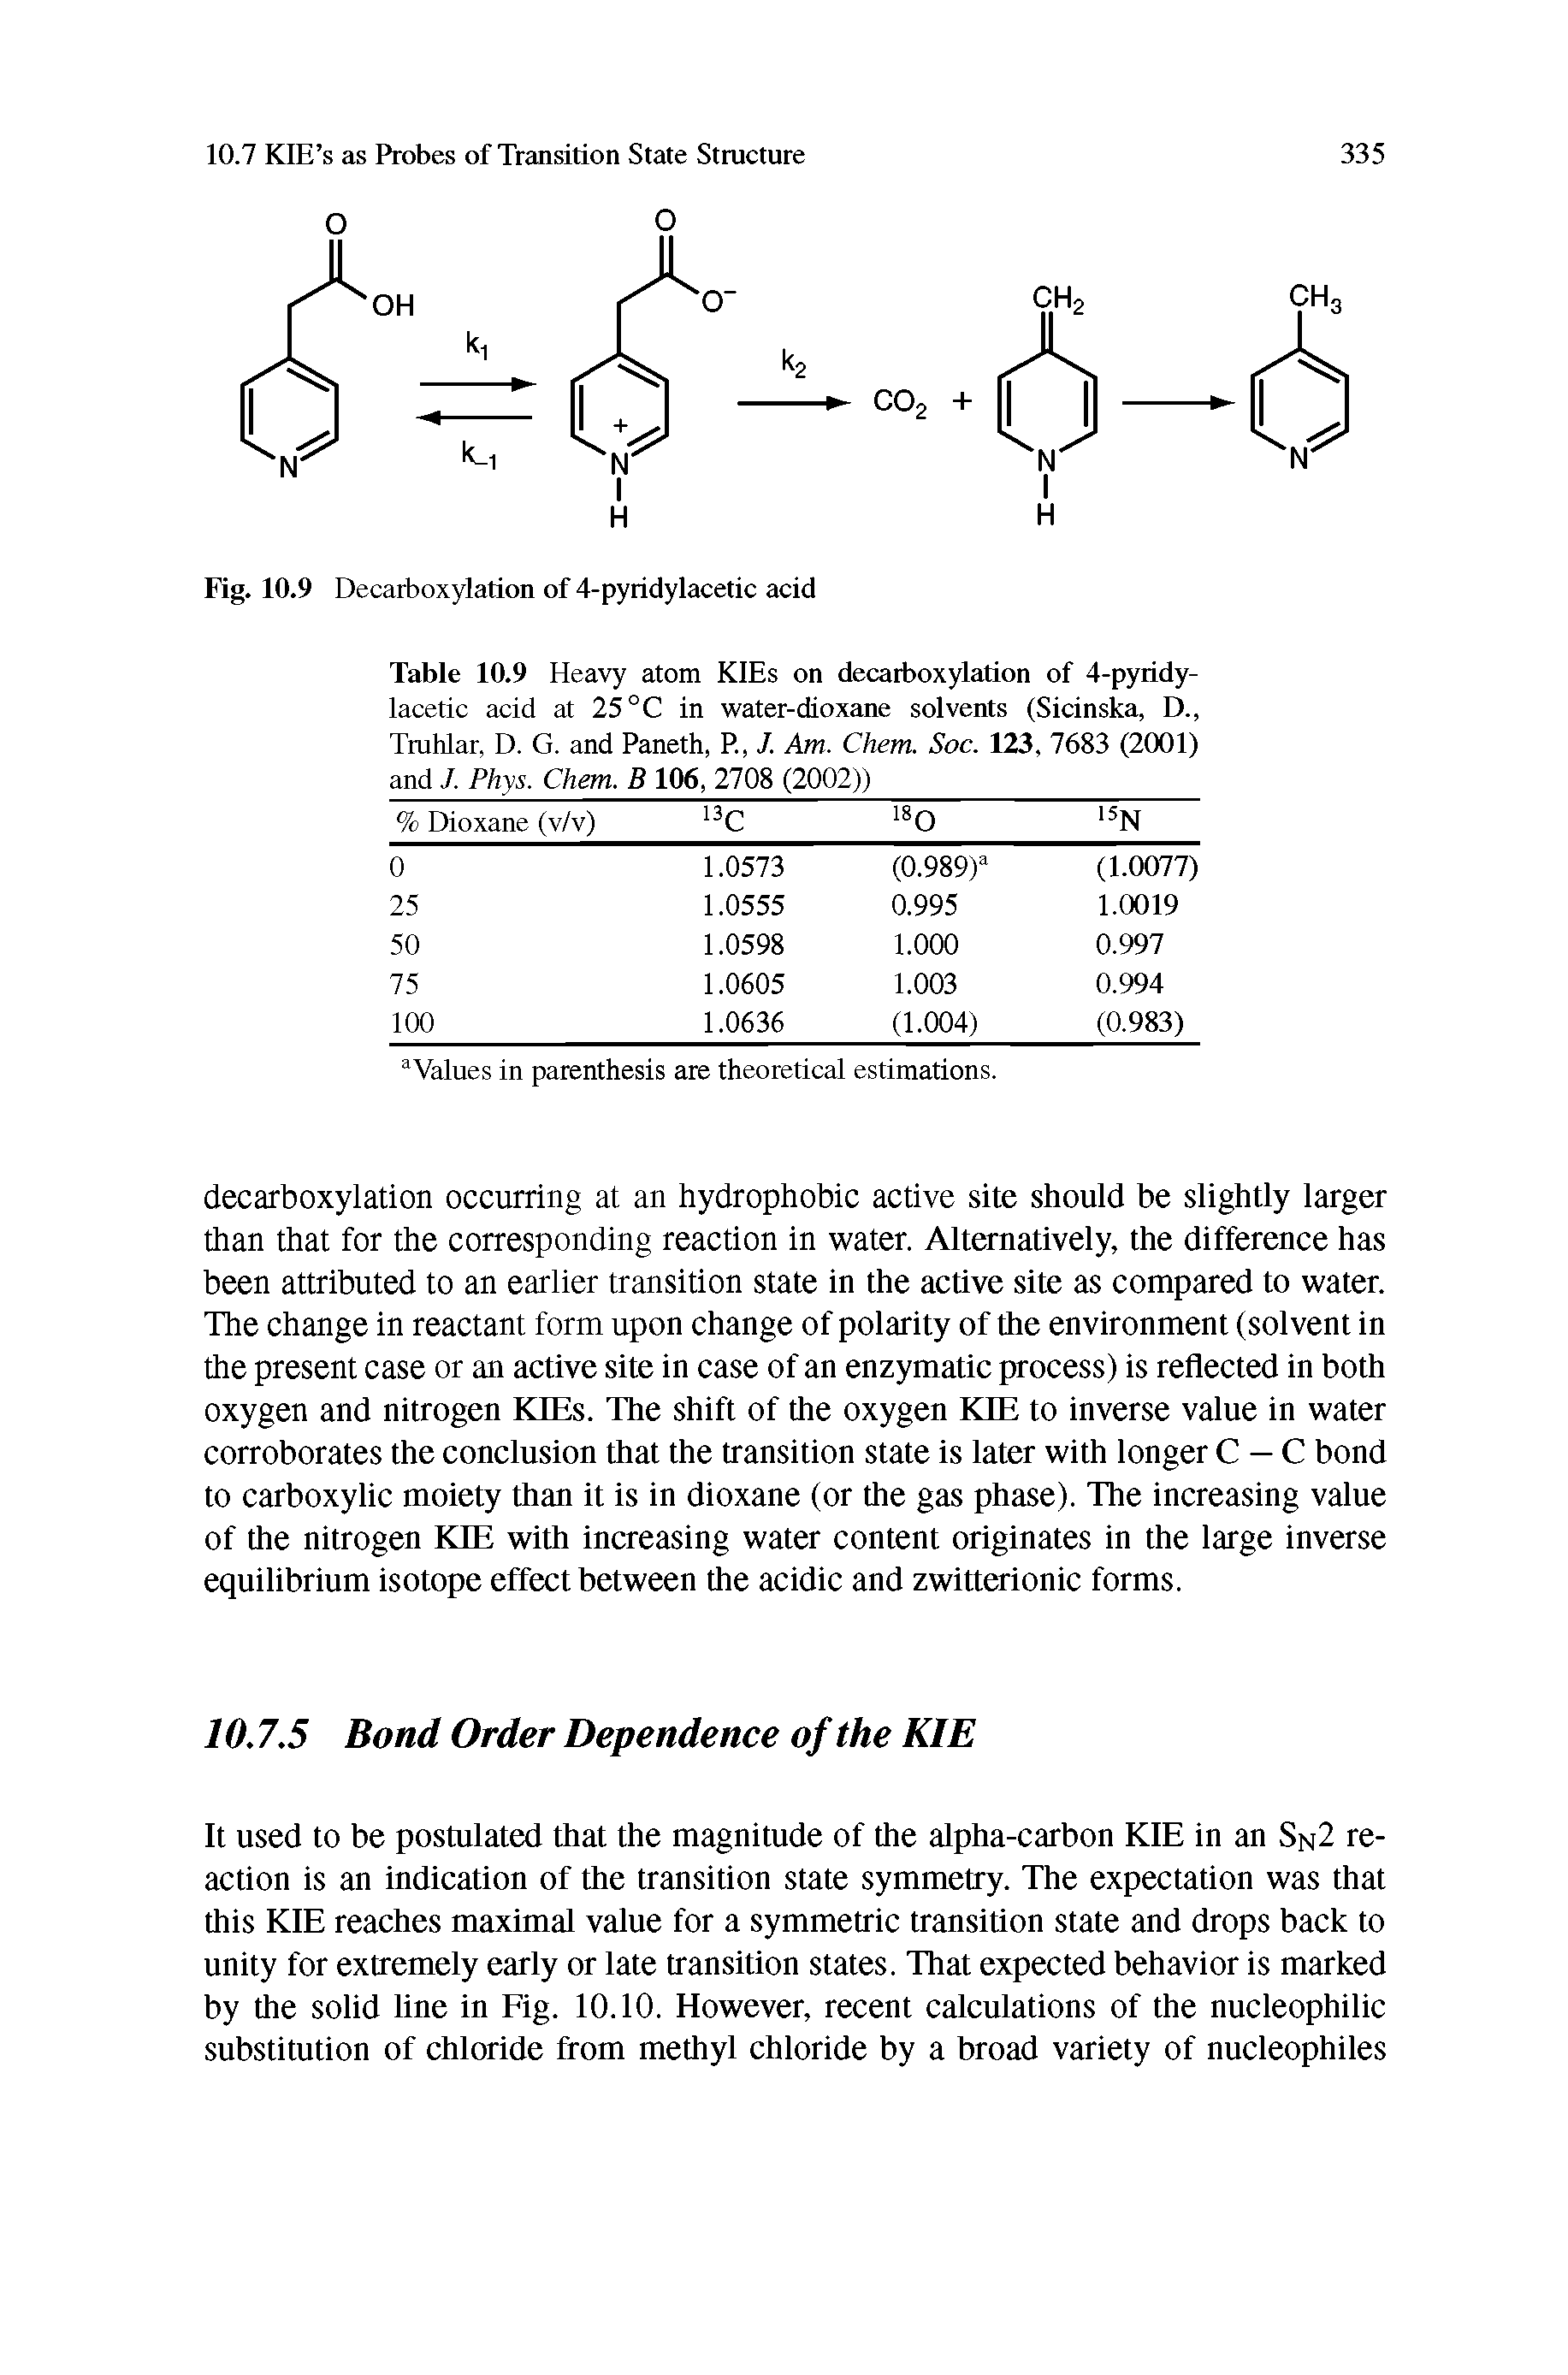 Table 10.9 Heavy atom KIEs on decarboxylation of 4-pyridylacetic acid at 25 °C in water-dioxane solvents (Sicinska, D., Truhlar, D. G. and Paneth, P., J. Am. Chem. Soc. 123, 7683 (2001) and J. Phys. Chem. B 106, 2708 (2002)) ...